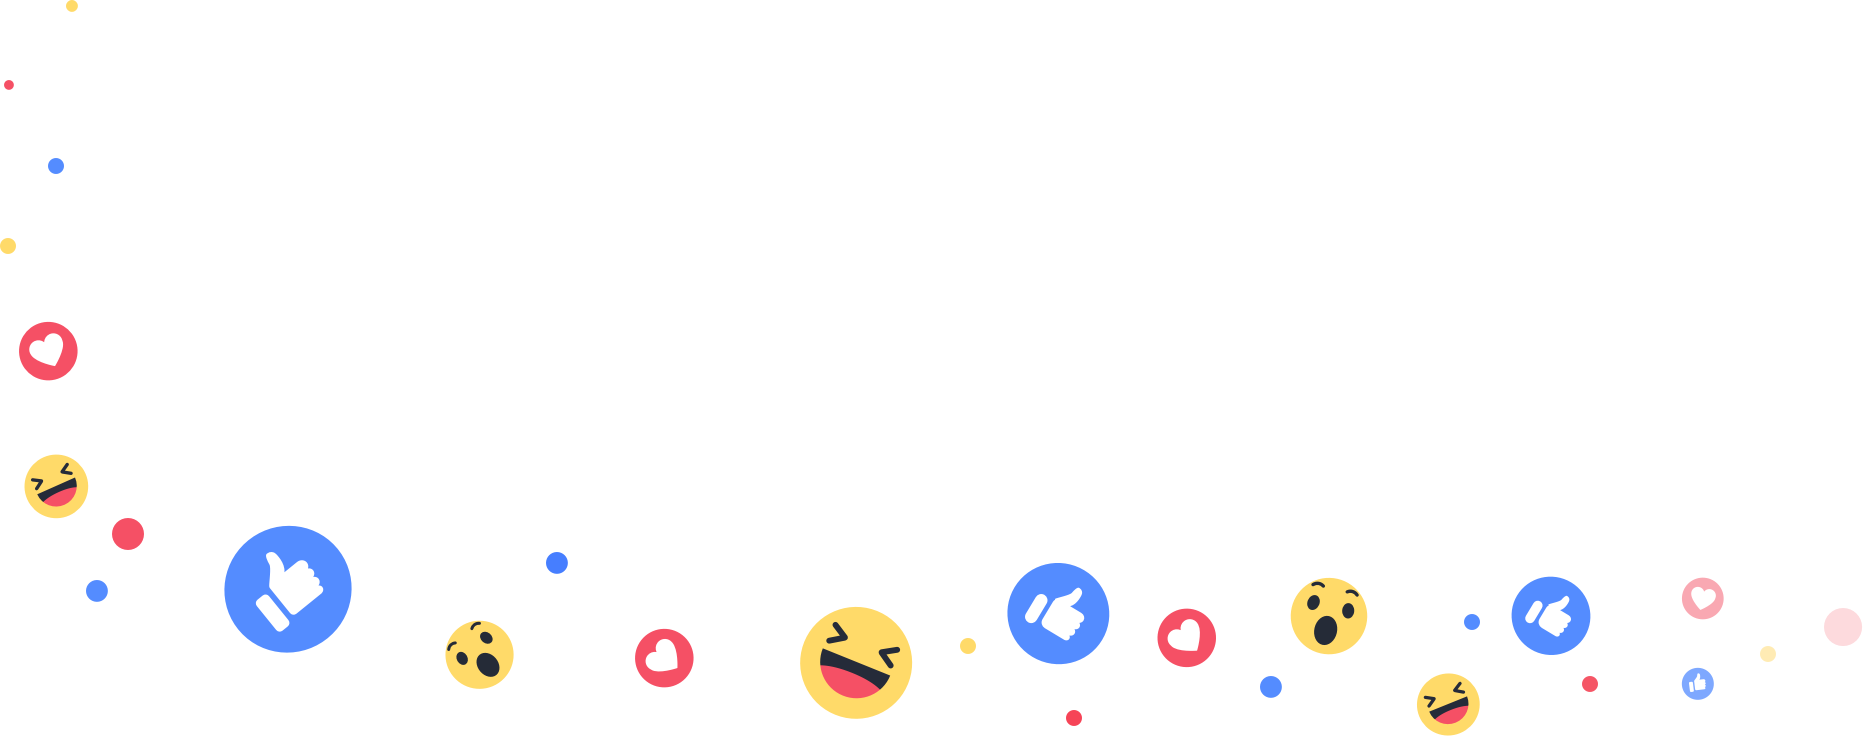 Portable Network Graphics Image Clip Art Live Television - Facebook Live Reactions Png - HD Wallpaper 